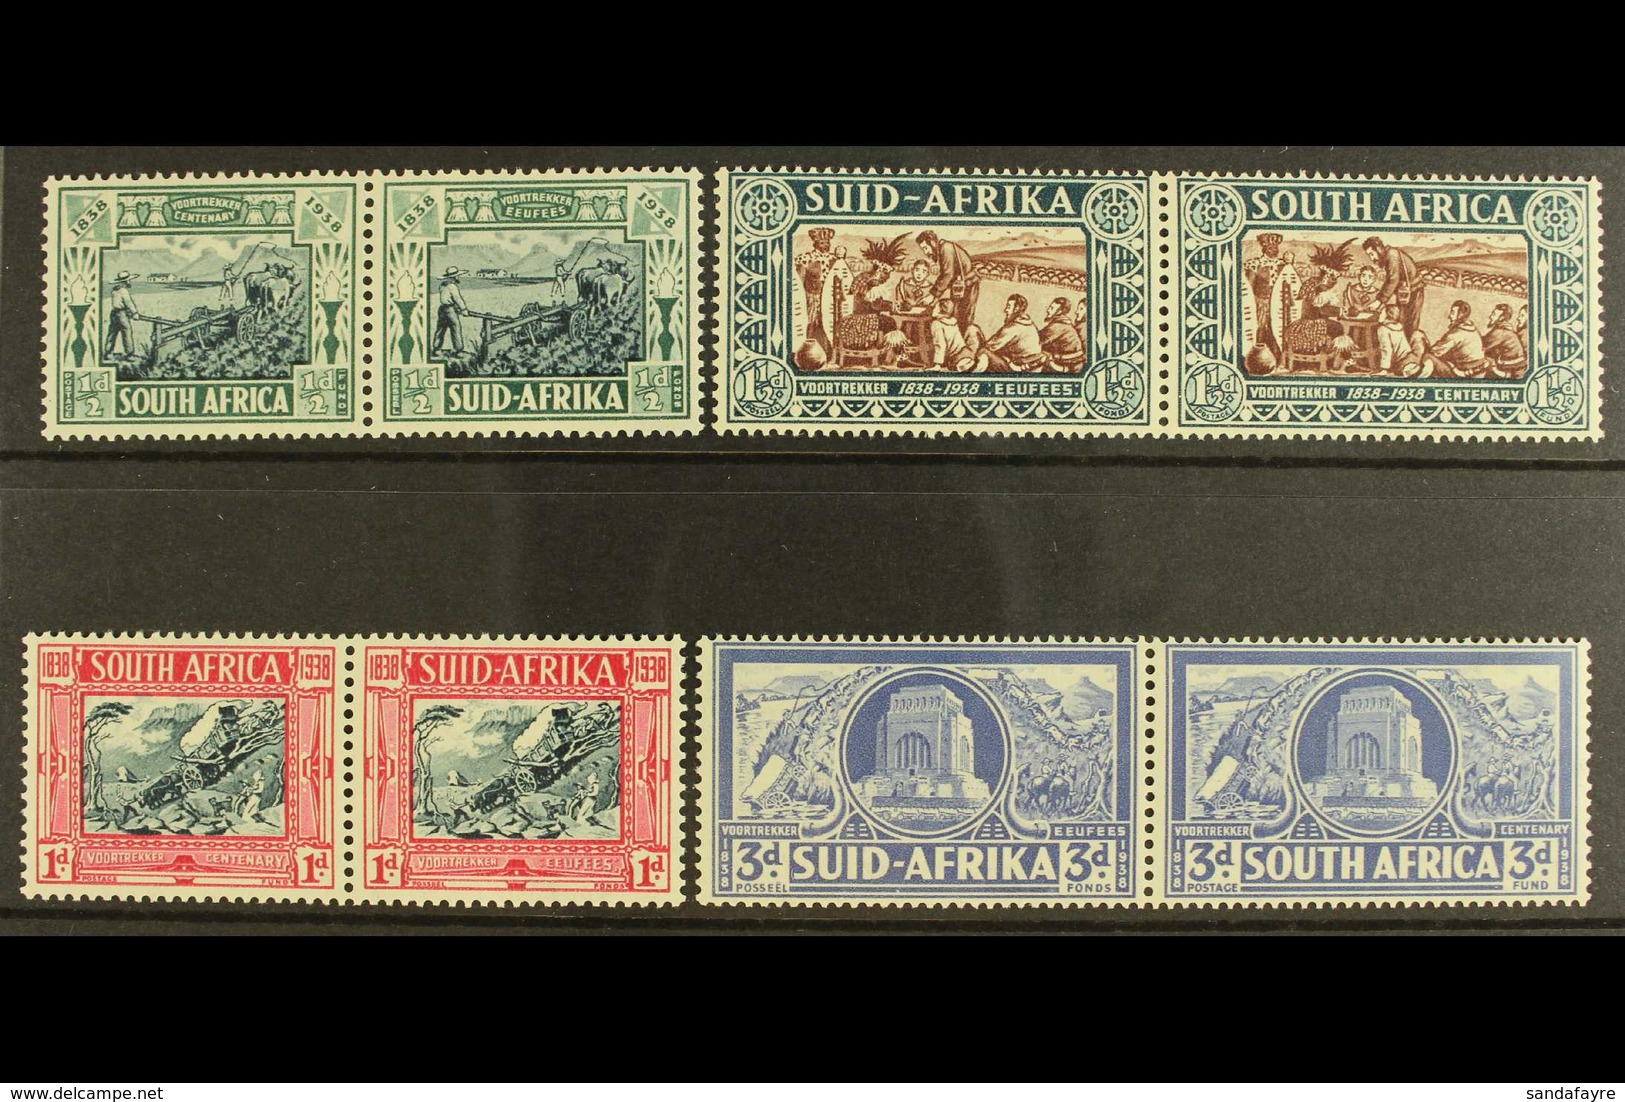 1938 Voortrekker Centenary Memorial Fund Set, SG 76/9, Never Hinged Mint (4 Pairs). For More Images, Please Visit Http:/ - Unclassified